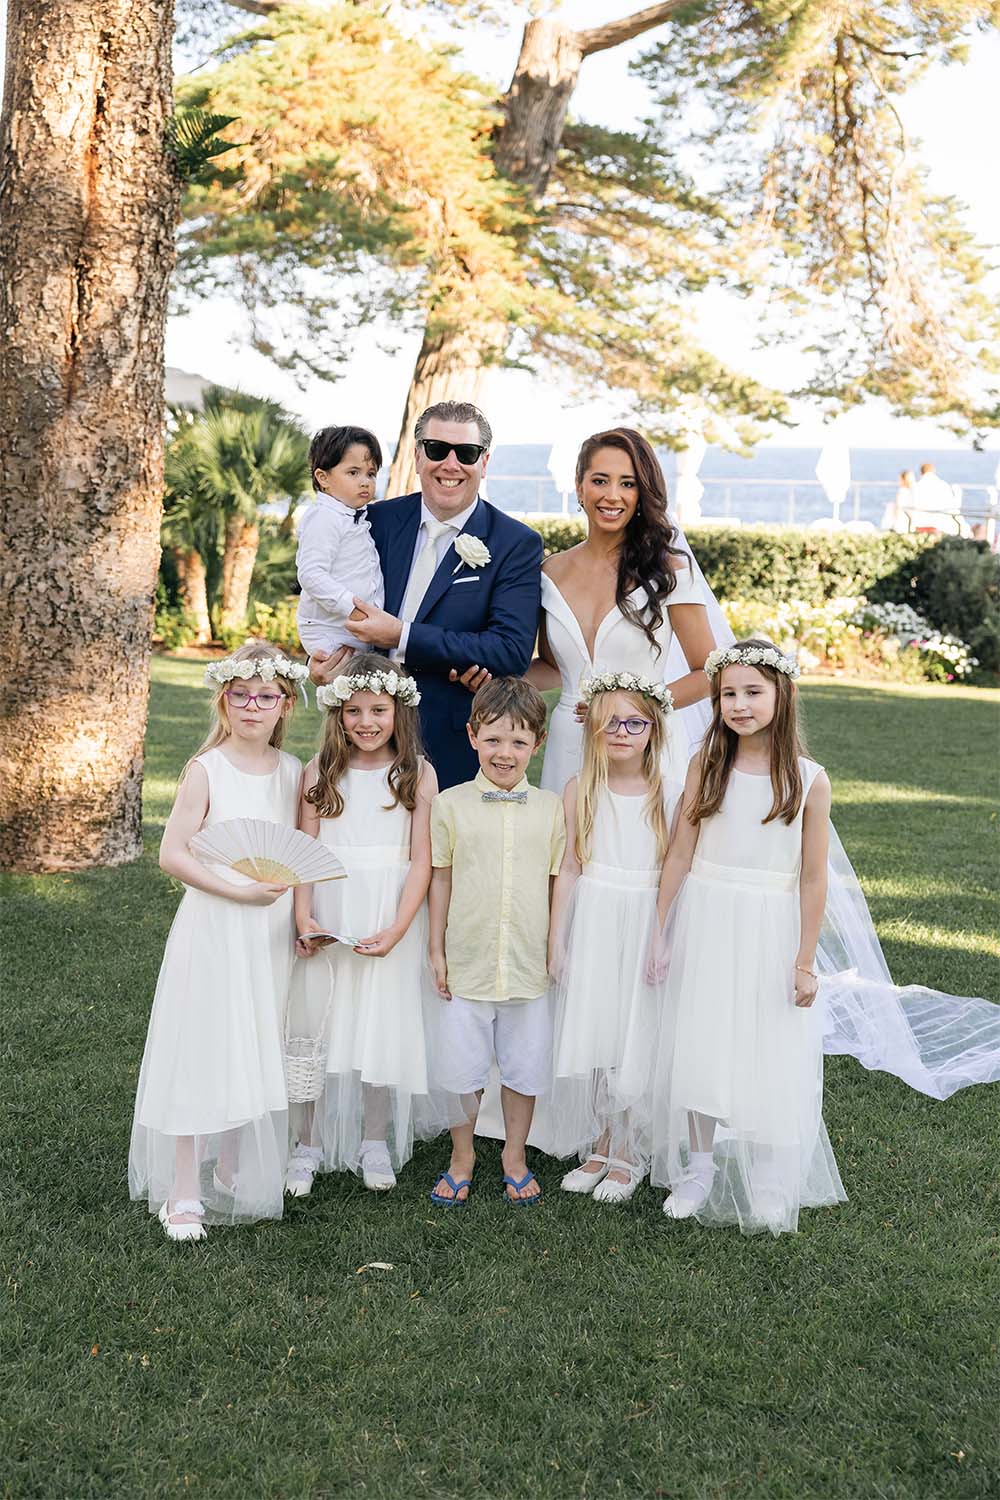 flower girl outfit ideas for South of France ceremonies